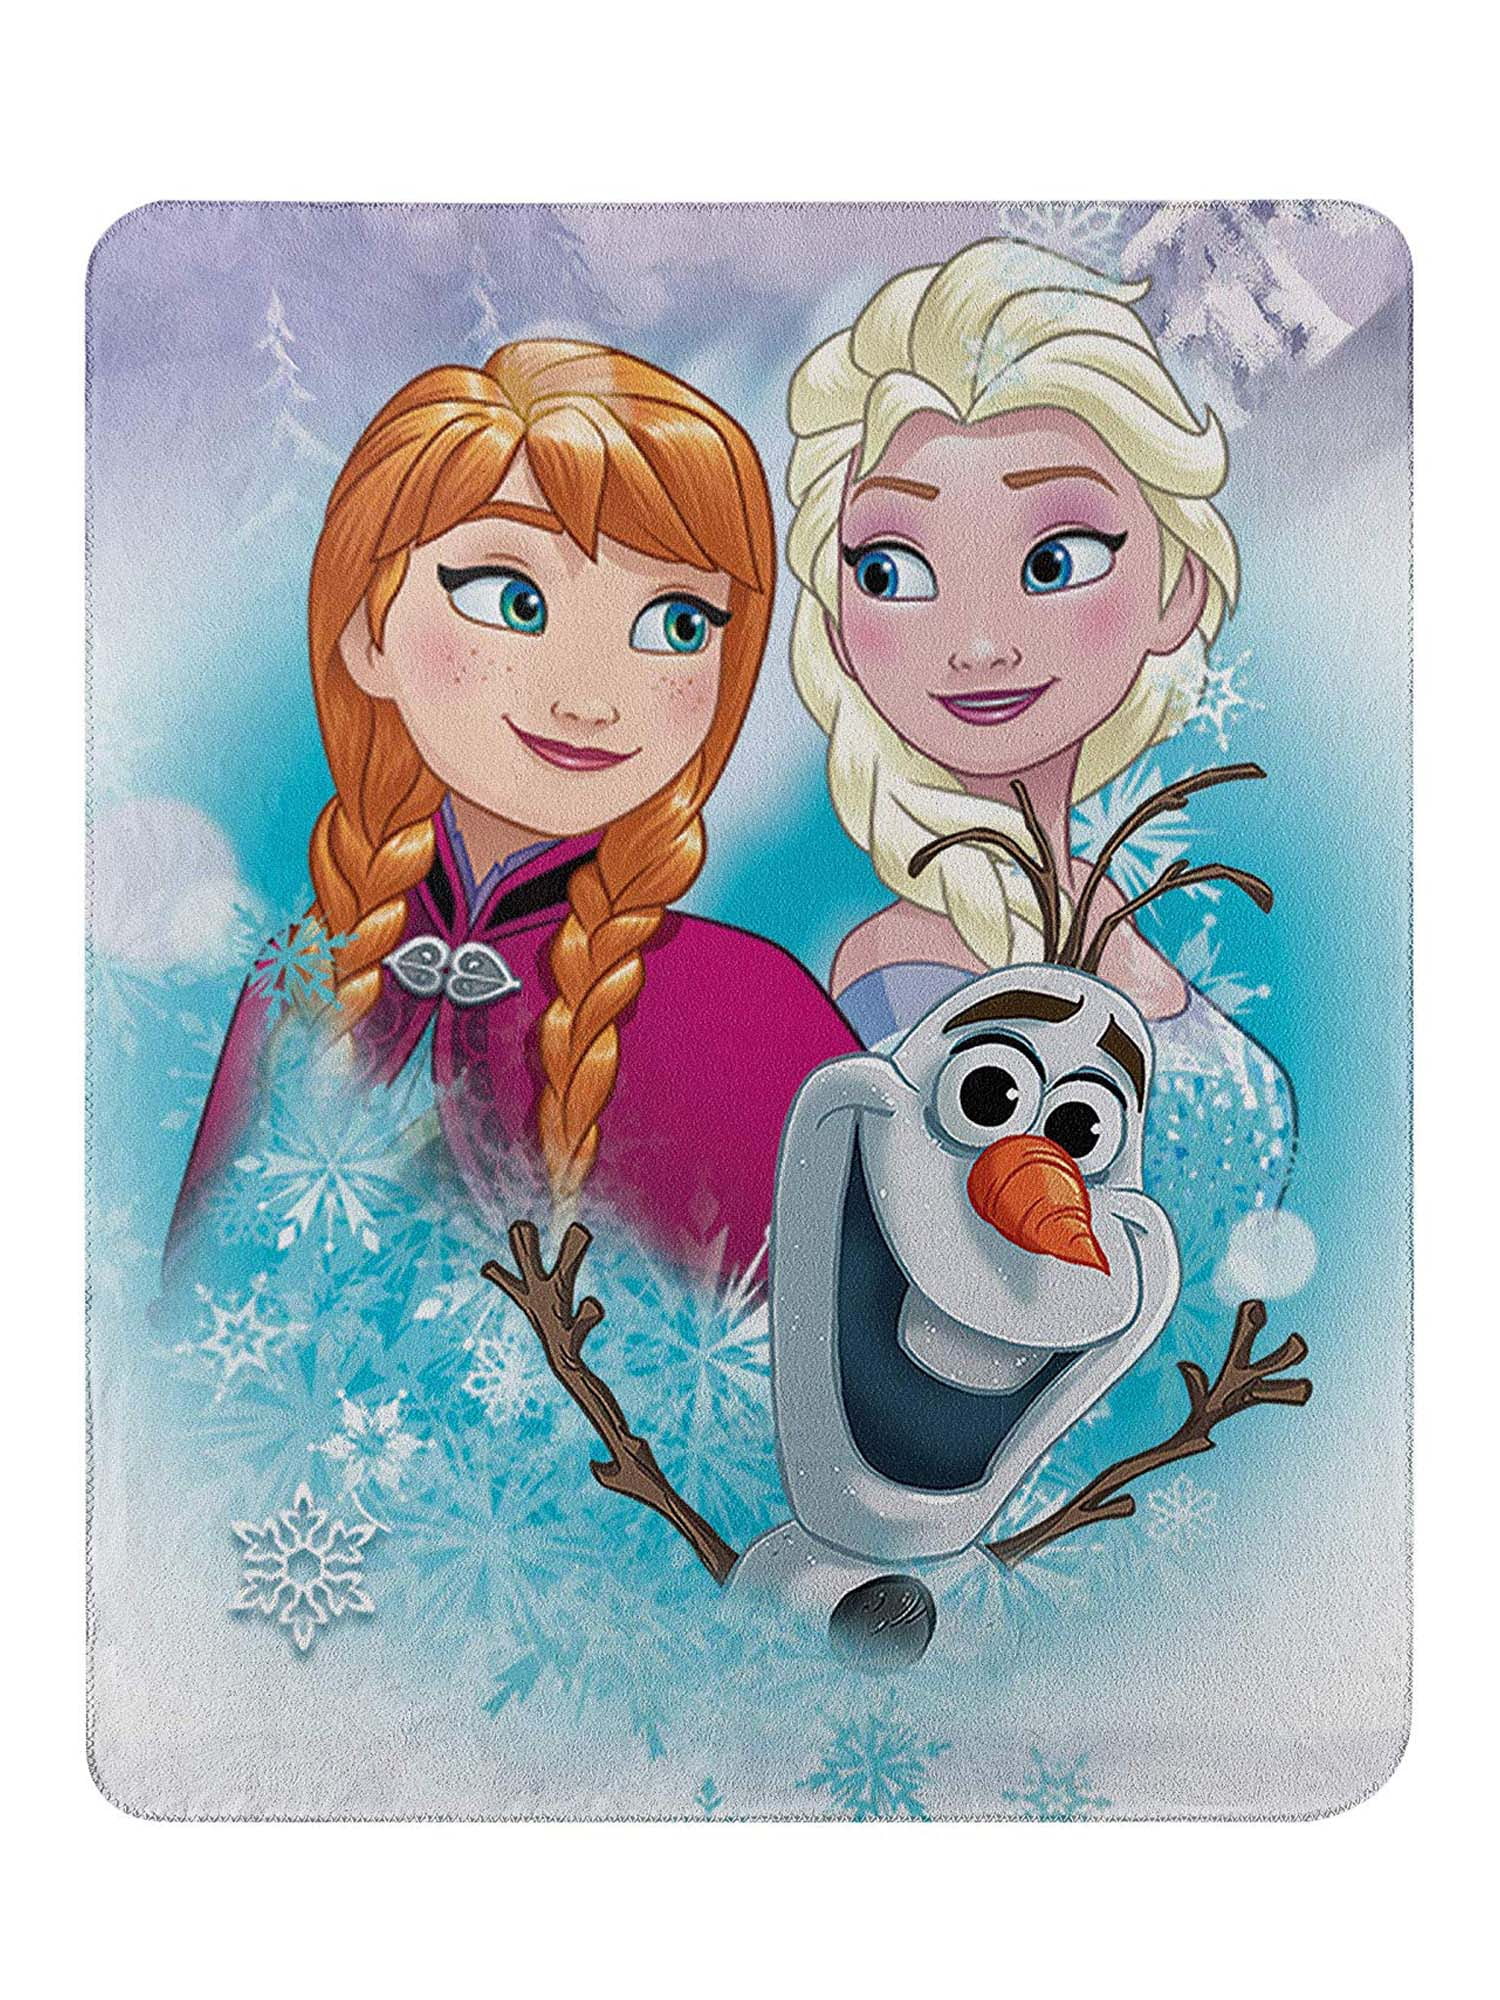 Disneys Frozen 46 x 60 Out in The Cold Fleece Throw Blanket Multi Color 